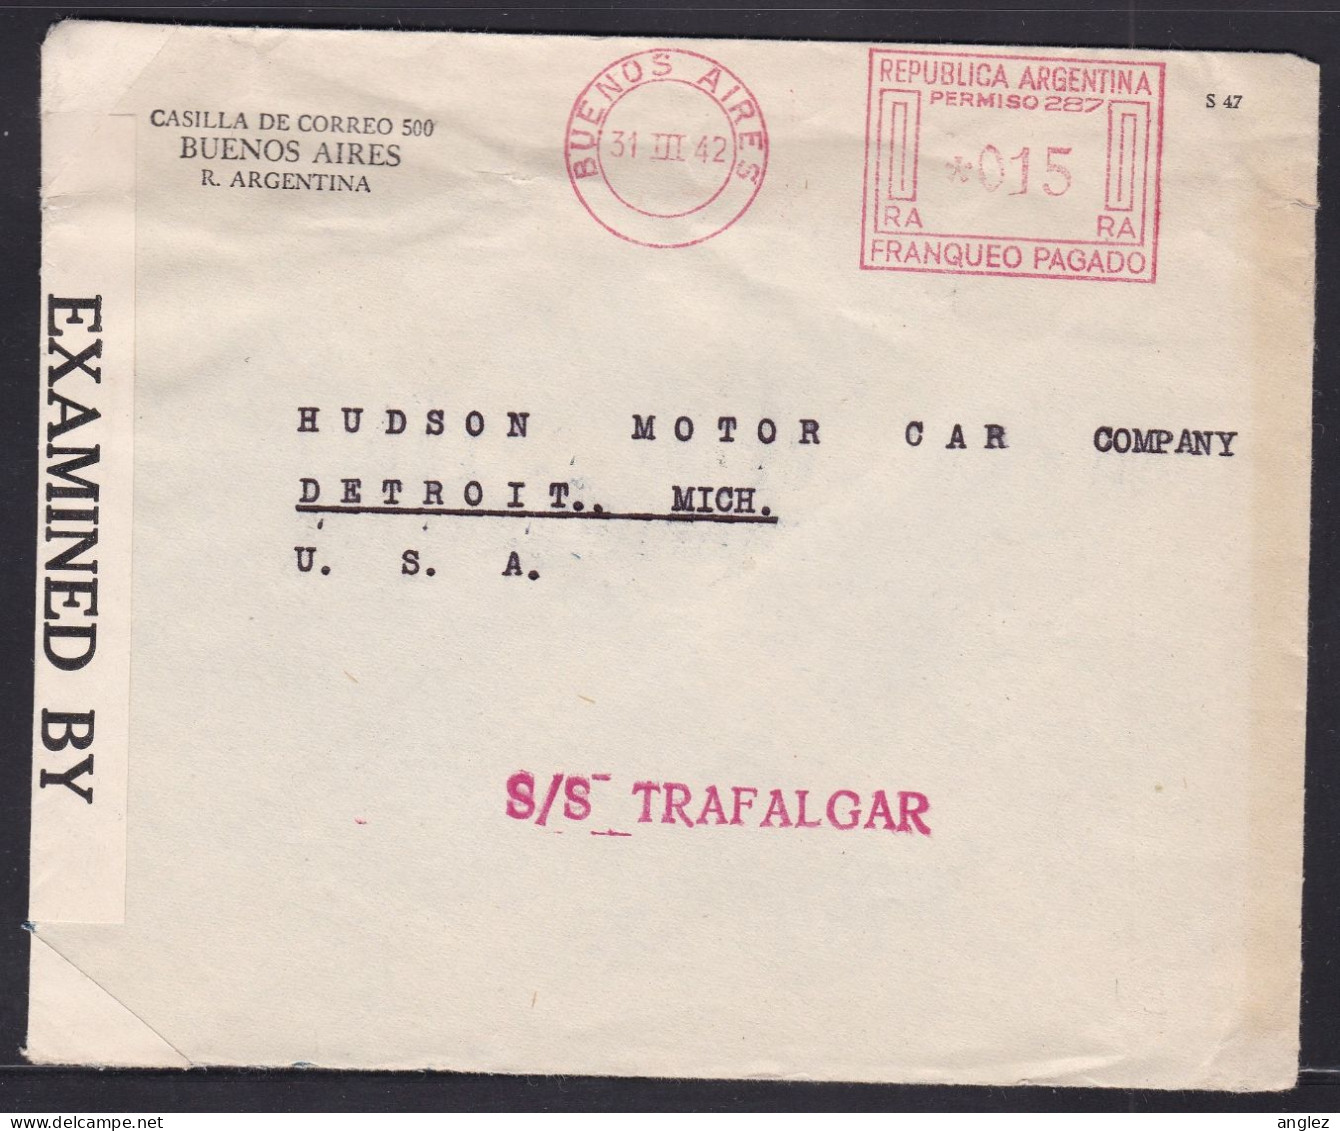 Argentina - 1942 Cover Buenos Aires To Detroit USA Per S/S Trafalgar - Censored - Covers & Documents